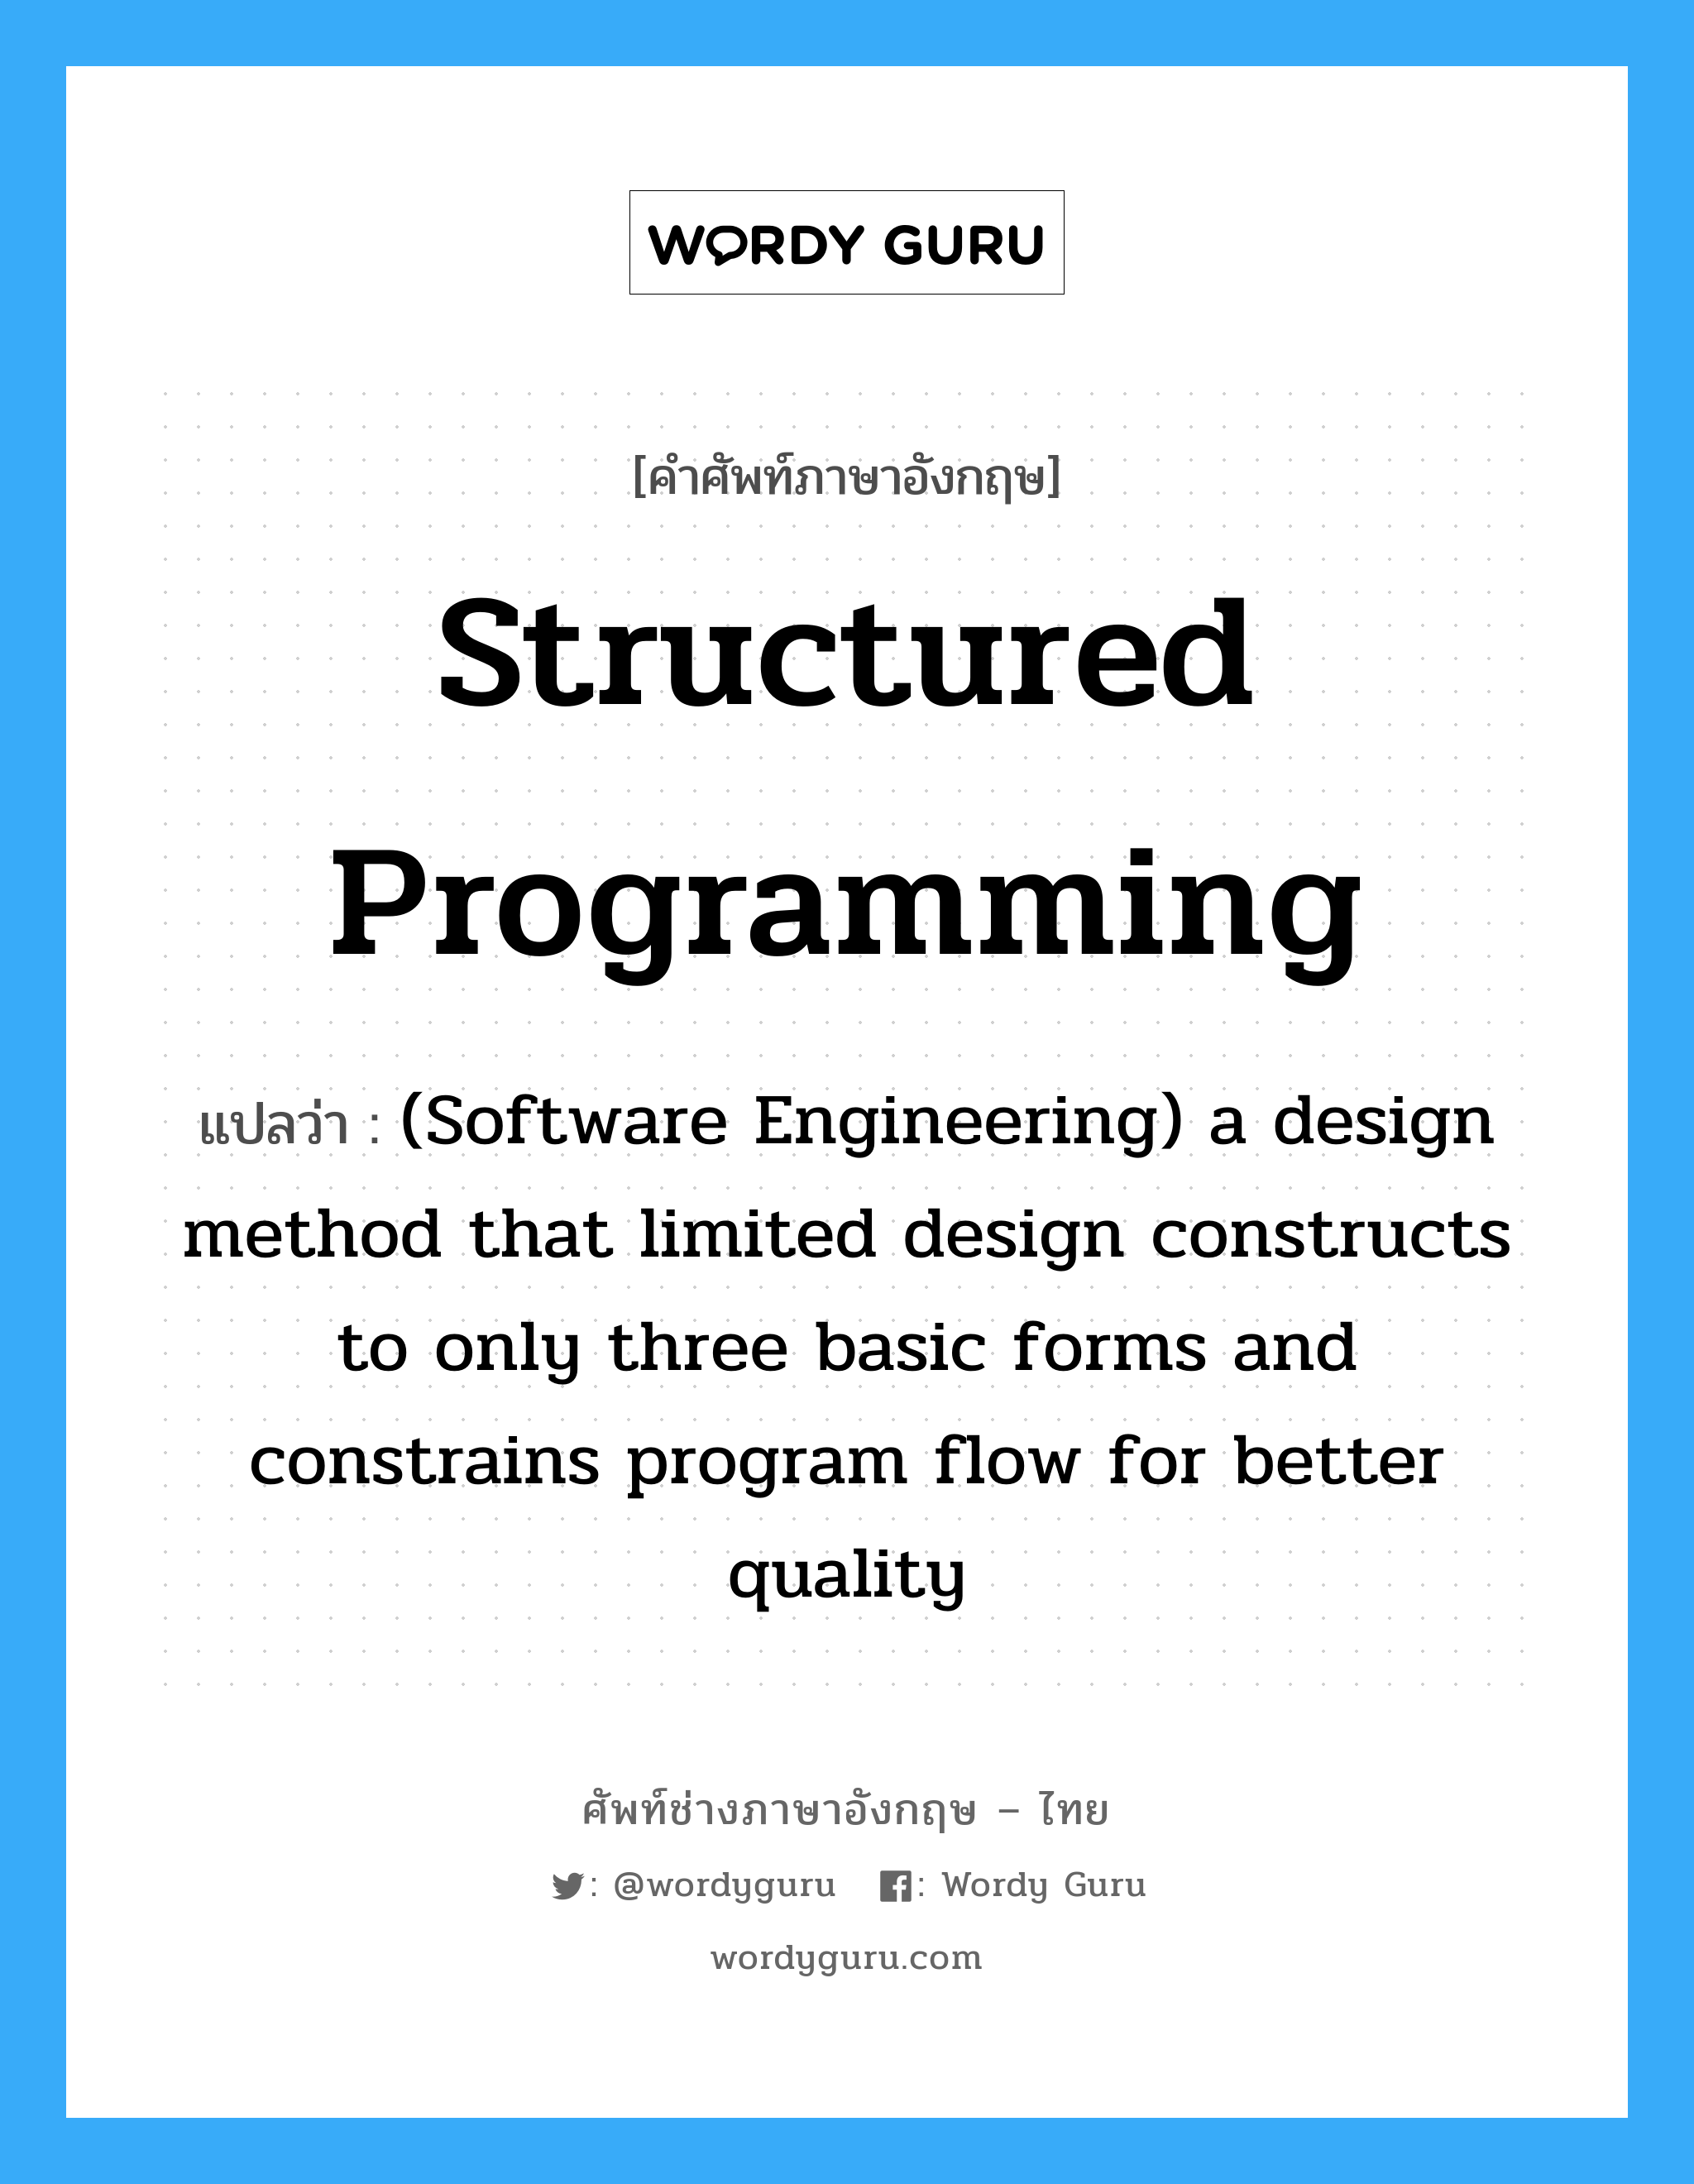 Structured programming แปลว่า?, คำศัพท์ช่างภาษาอังกฤษ - ไทย Structured programming คำศัพท์ภาษาอังกฤษ Structured programming แปลว่า (Software Engineering) a design method that limited design constructs to only three basic forms and constrains program flow for better quality